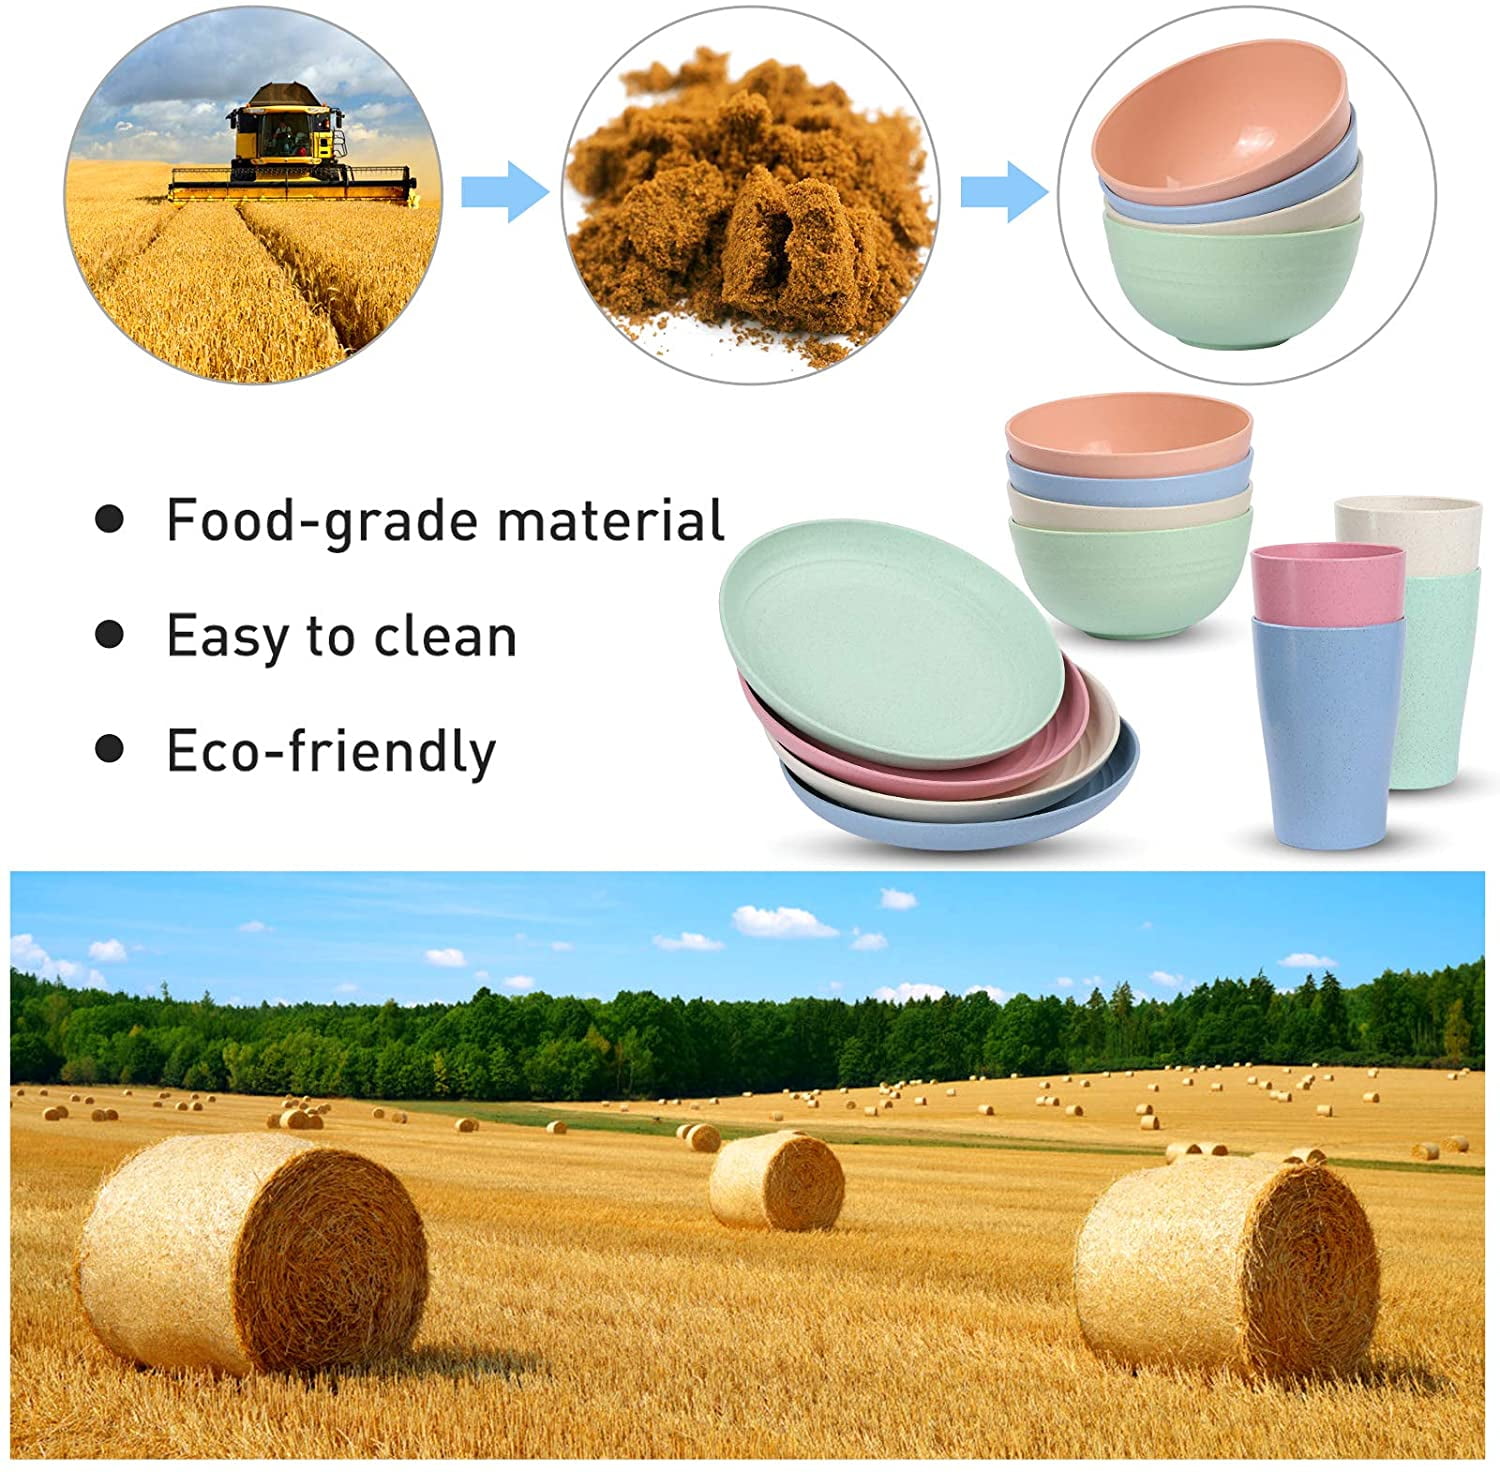 Cups Eco Friendly,Dishwasher Safe,Wheat Straw Plates,Wheat Straw Bowls 12pcs Wheat Straw Dinnerware Sets Blue-Unbreakable Microwave Safe-Lightweight Bowls Plates Set-Reusable Cereal Bowls 